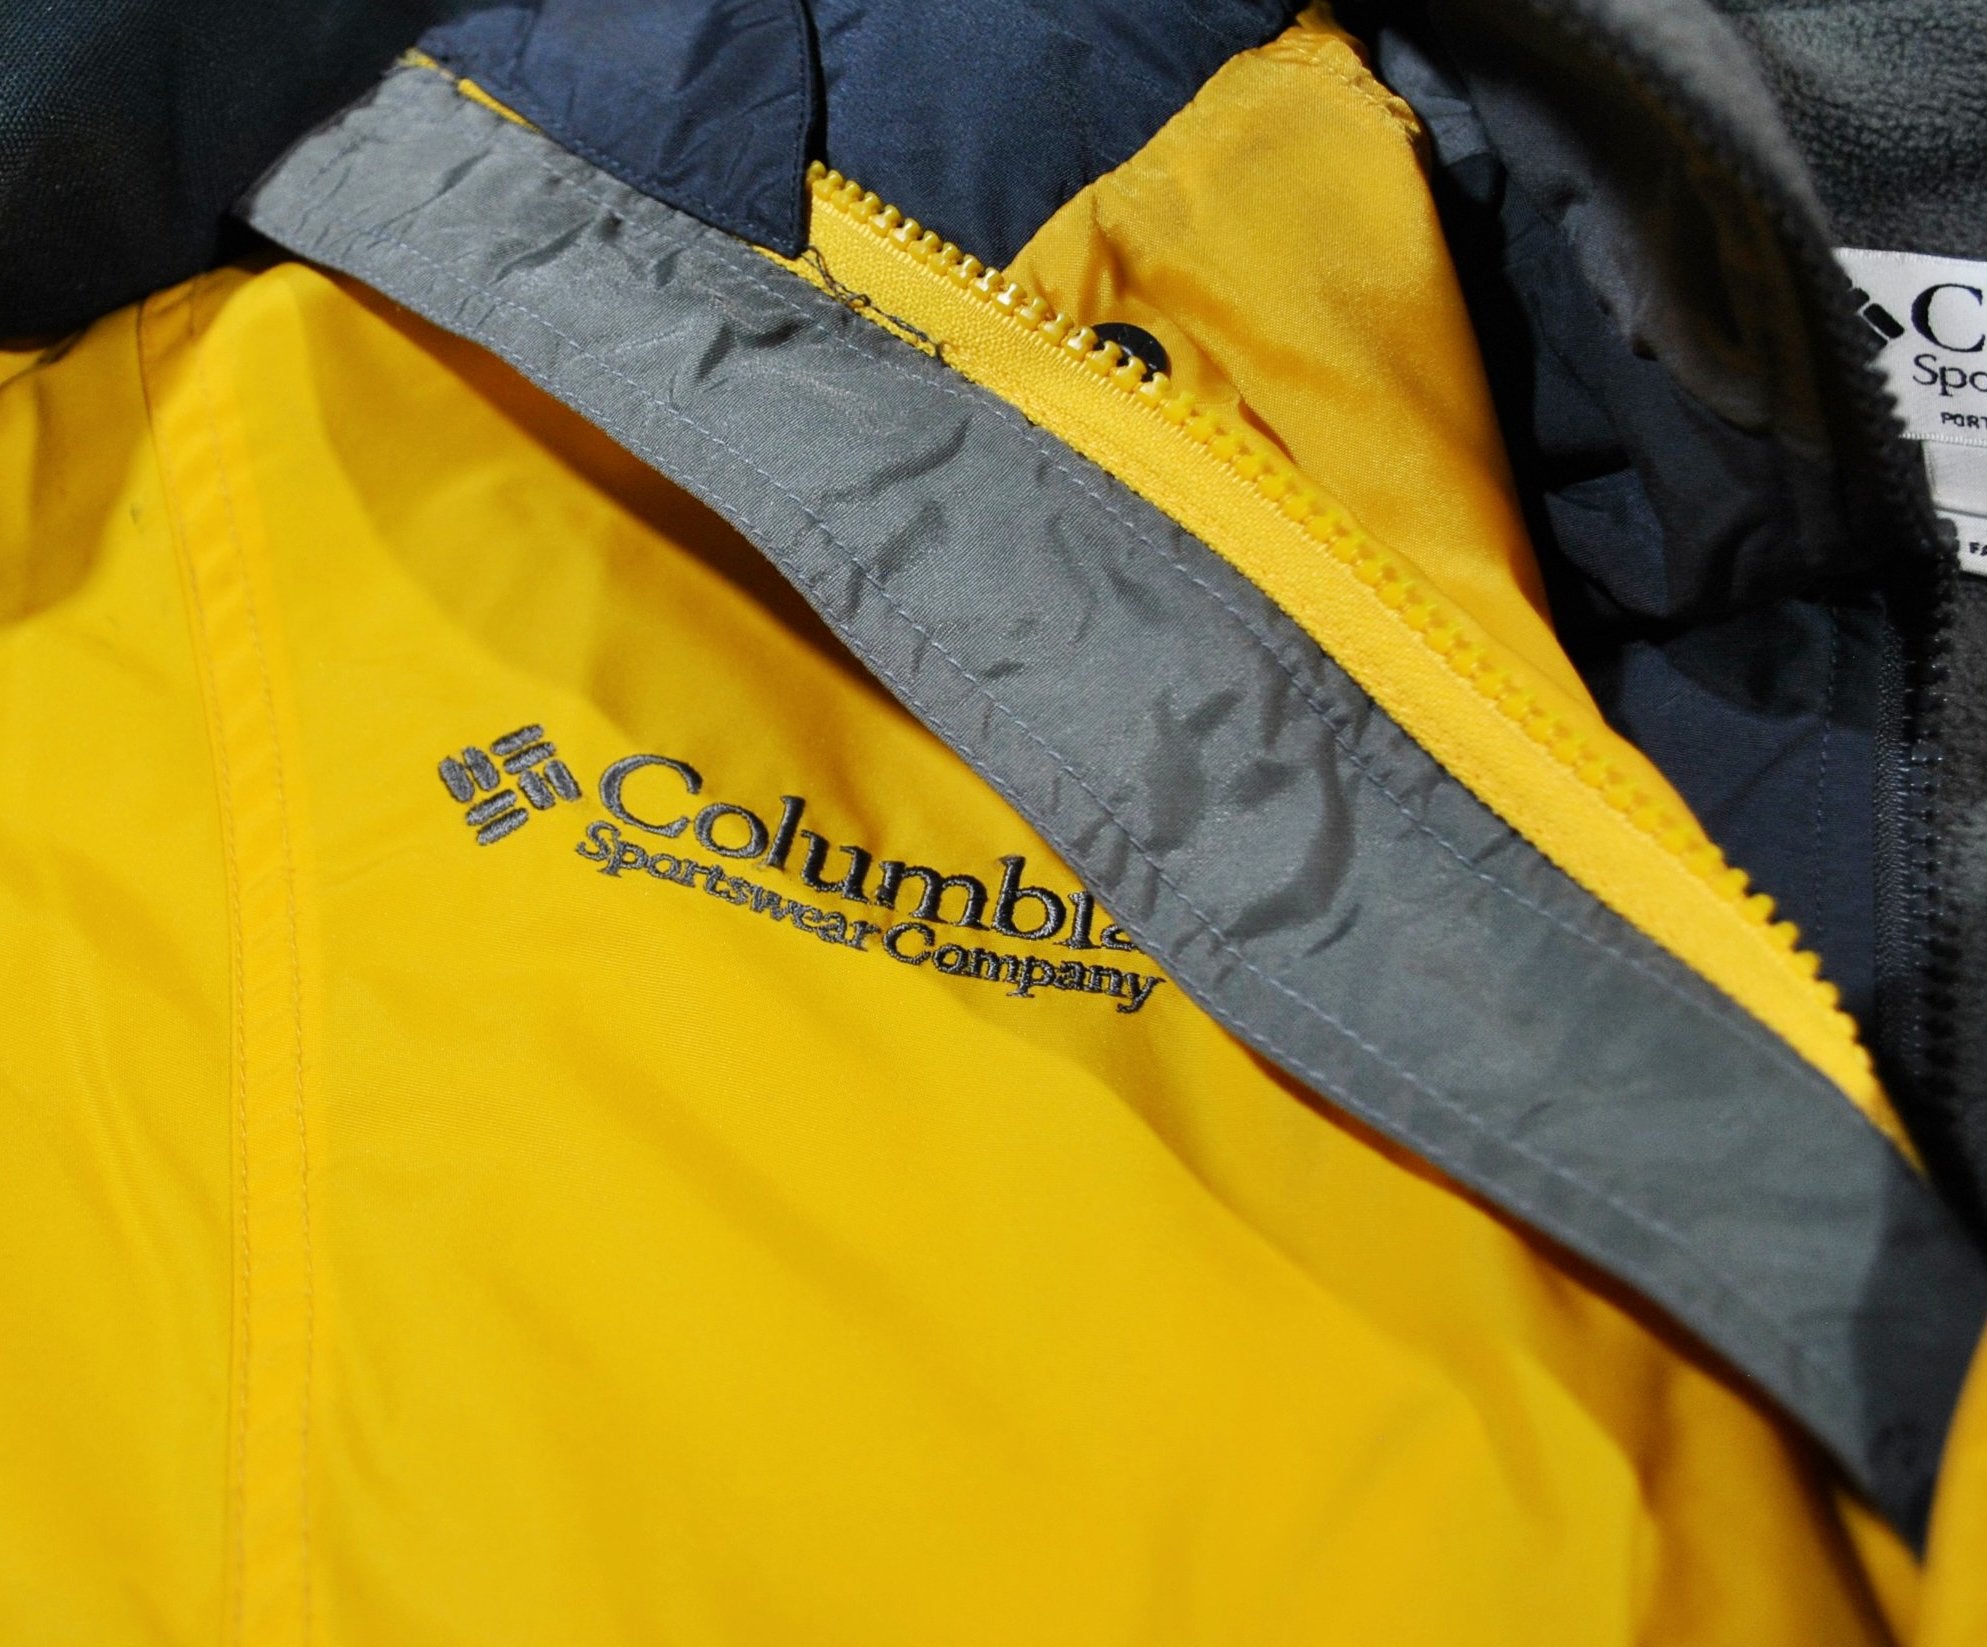 columbia 2 in 1 jacket